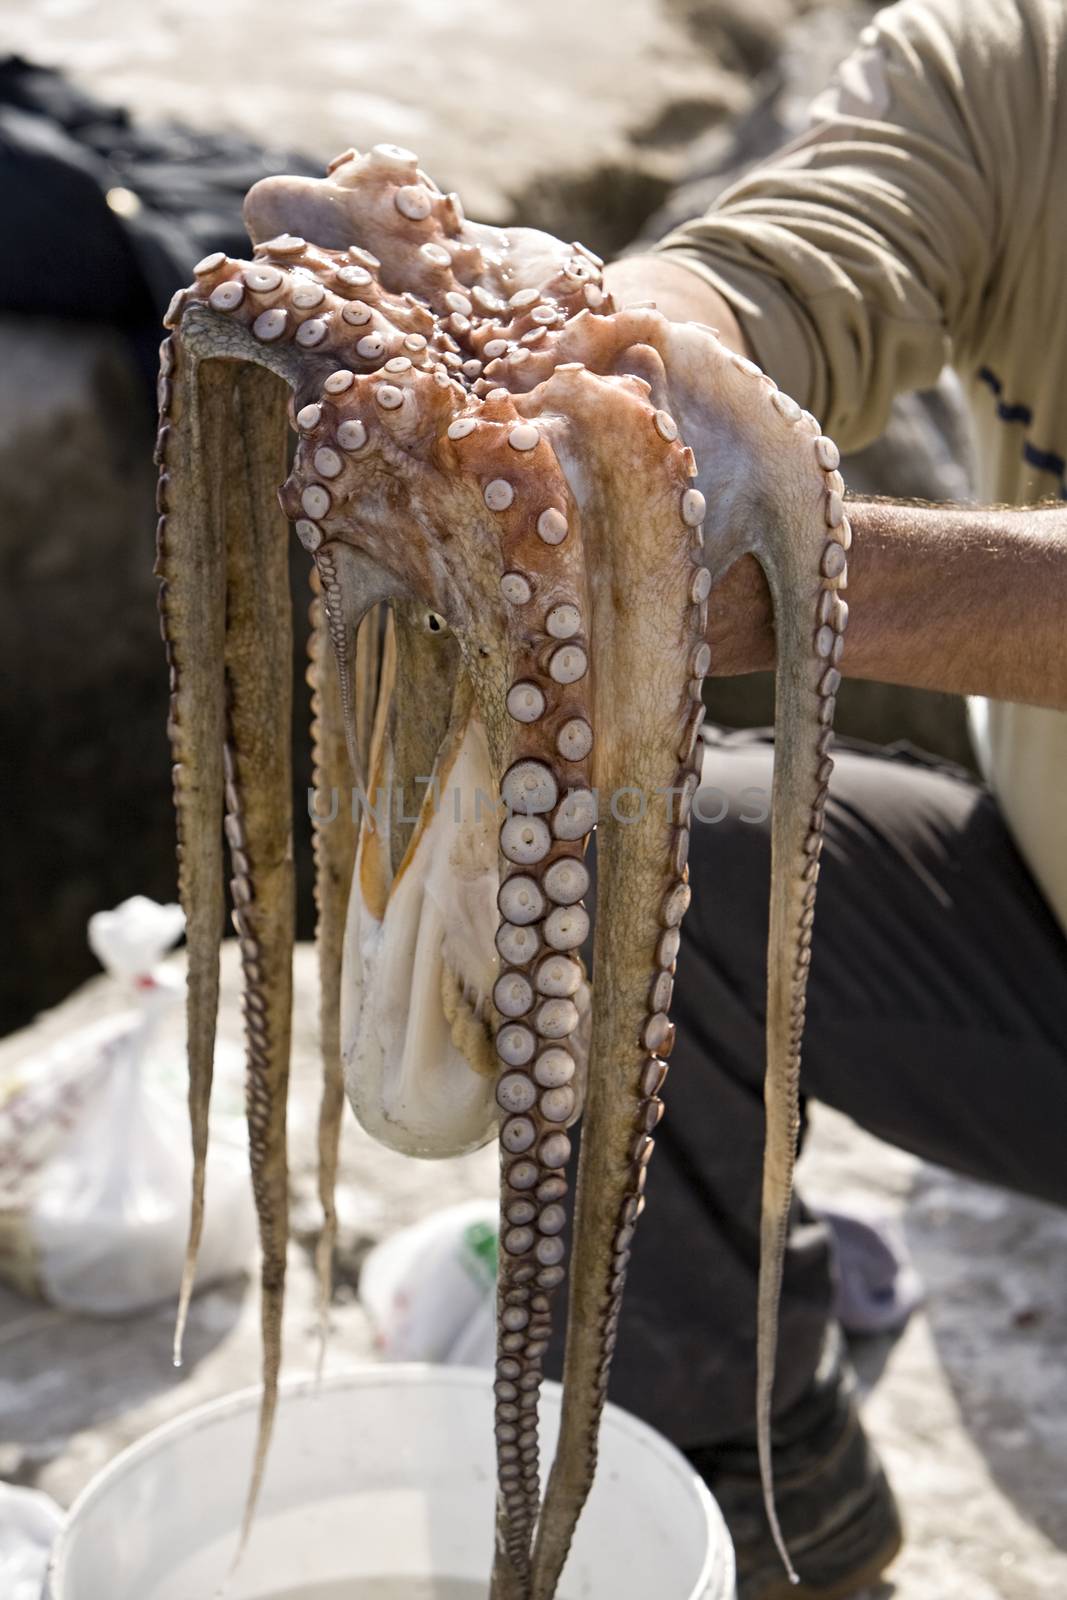 Just the caught octopus in hands, Estepona, Andalusia, Spain by digicomphoto